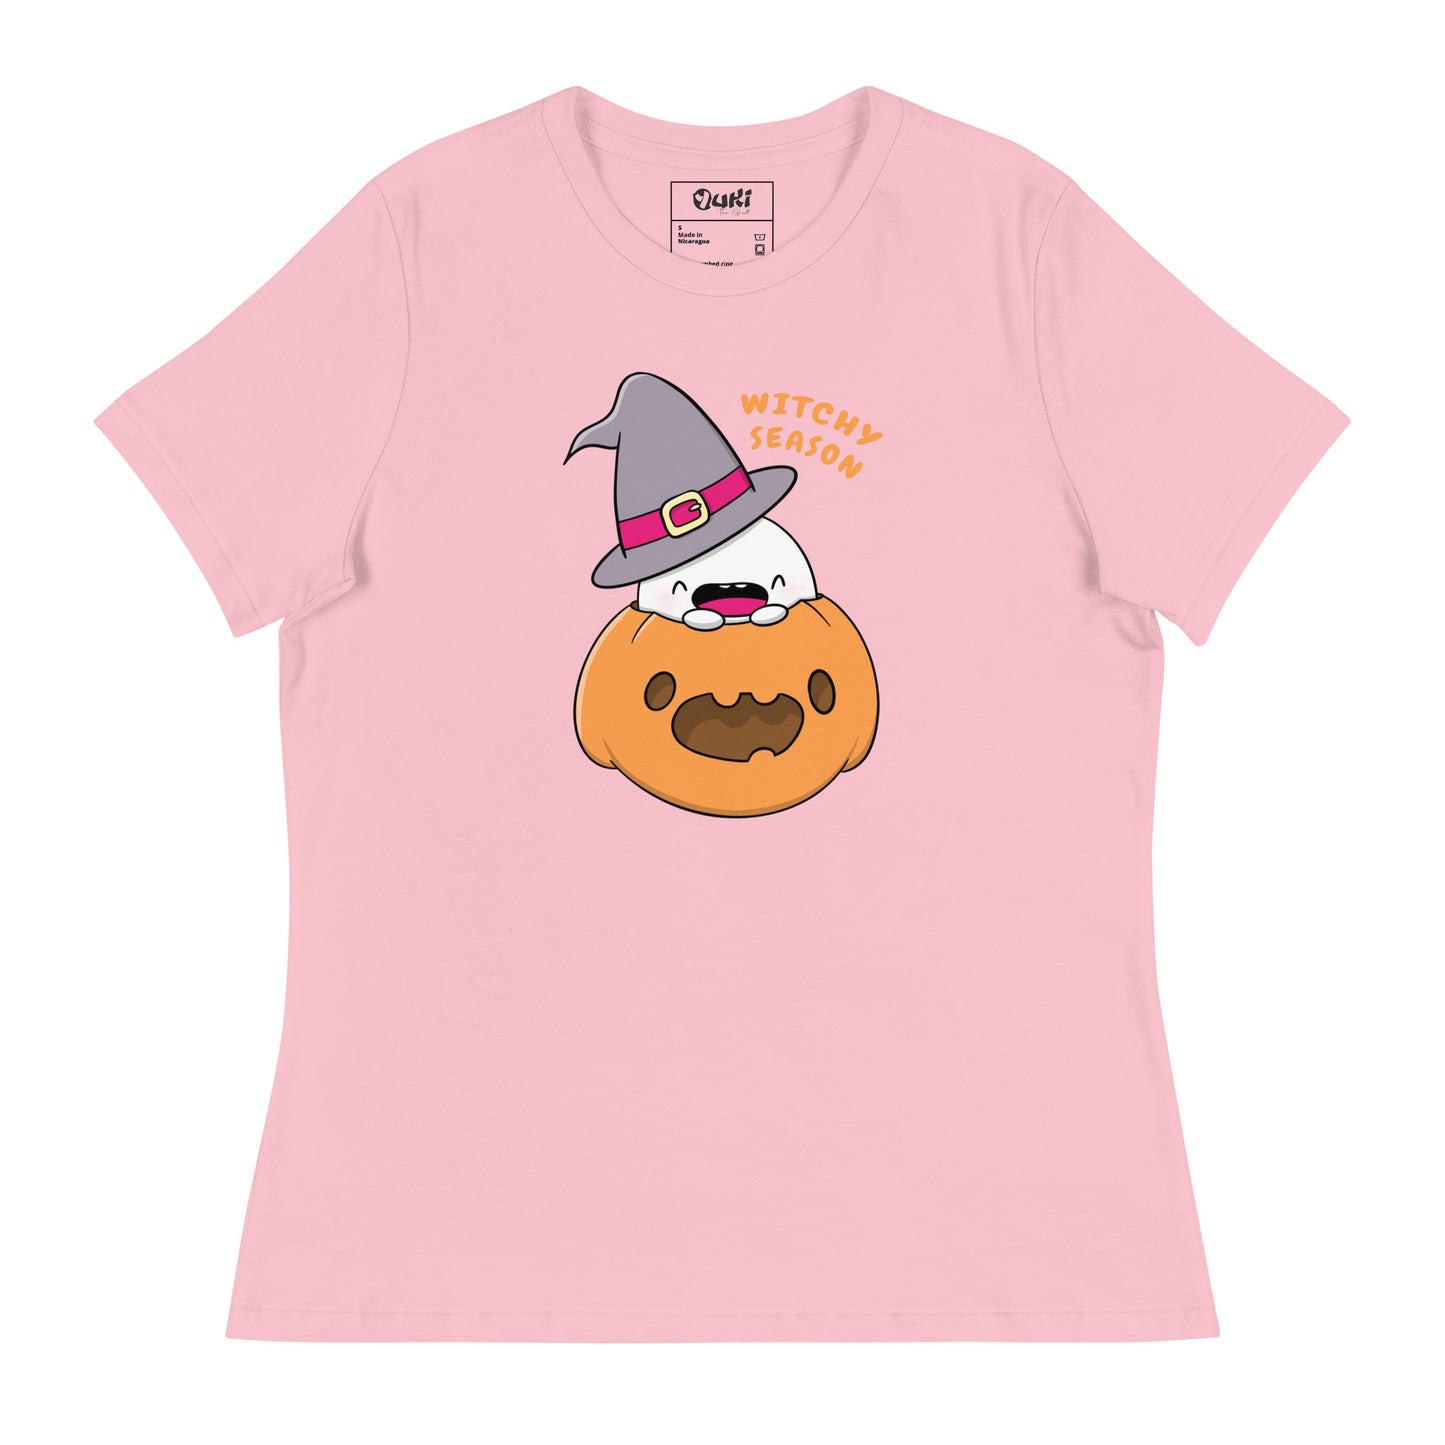 Witchy season - Women's Relaxed T-Shirt